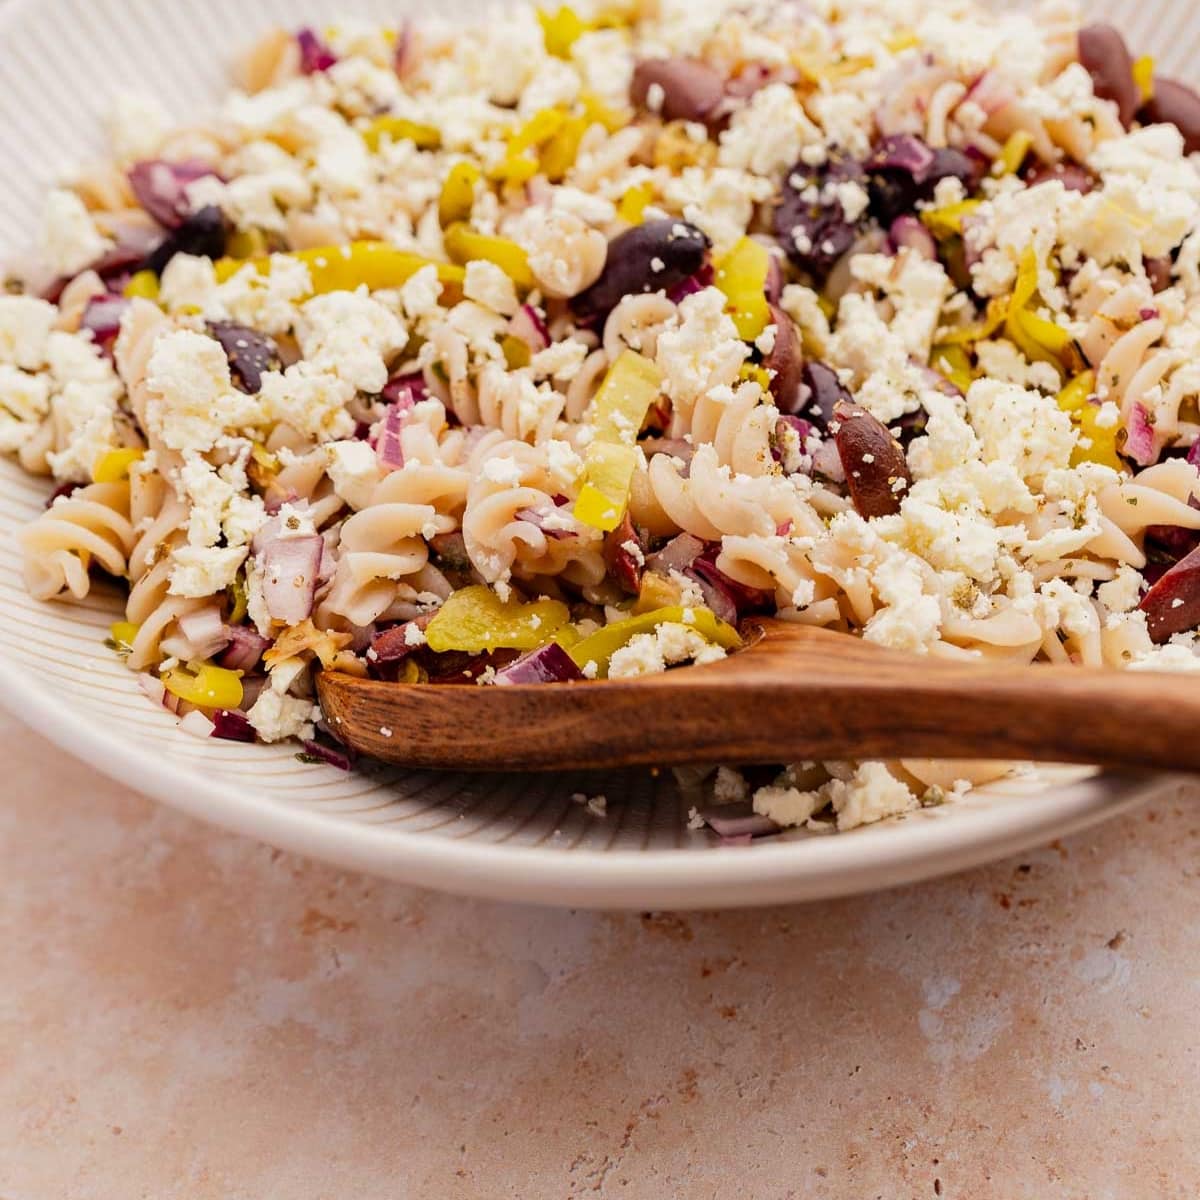 A bowl of Greek pasta salad with black olives, red onions, yellow peppers, and crumbled feta cheese, mixed with a wooden spoon.